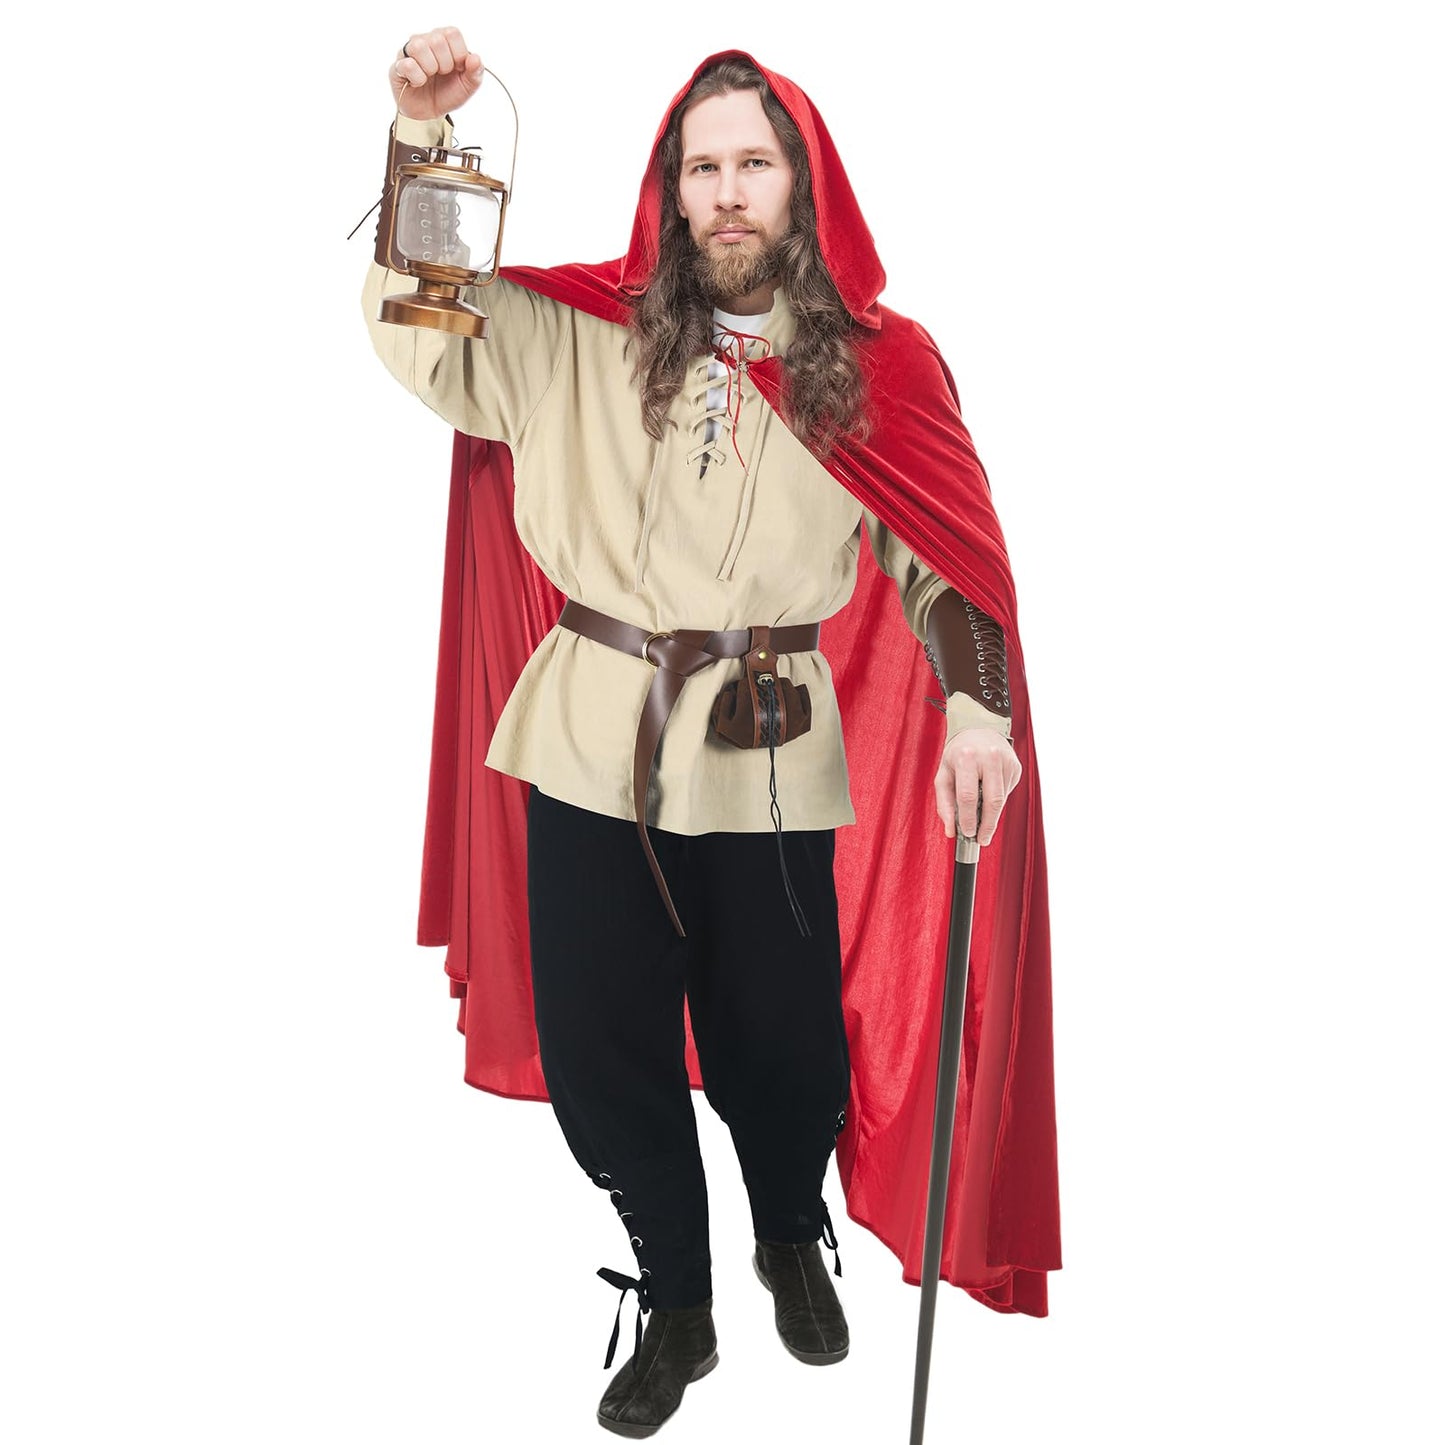 Jeyiour Men's Renaissance Costume Set Medieval Shirt Pirate Outfit Cosplay Viking Ankle Pants Belt Pouch Armband Beige Large